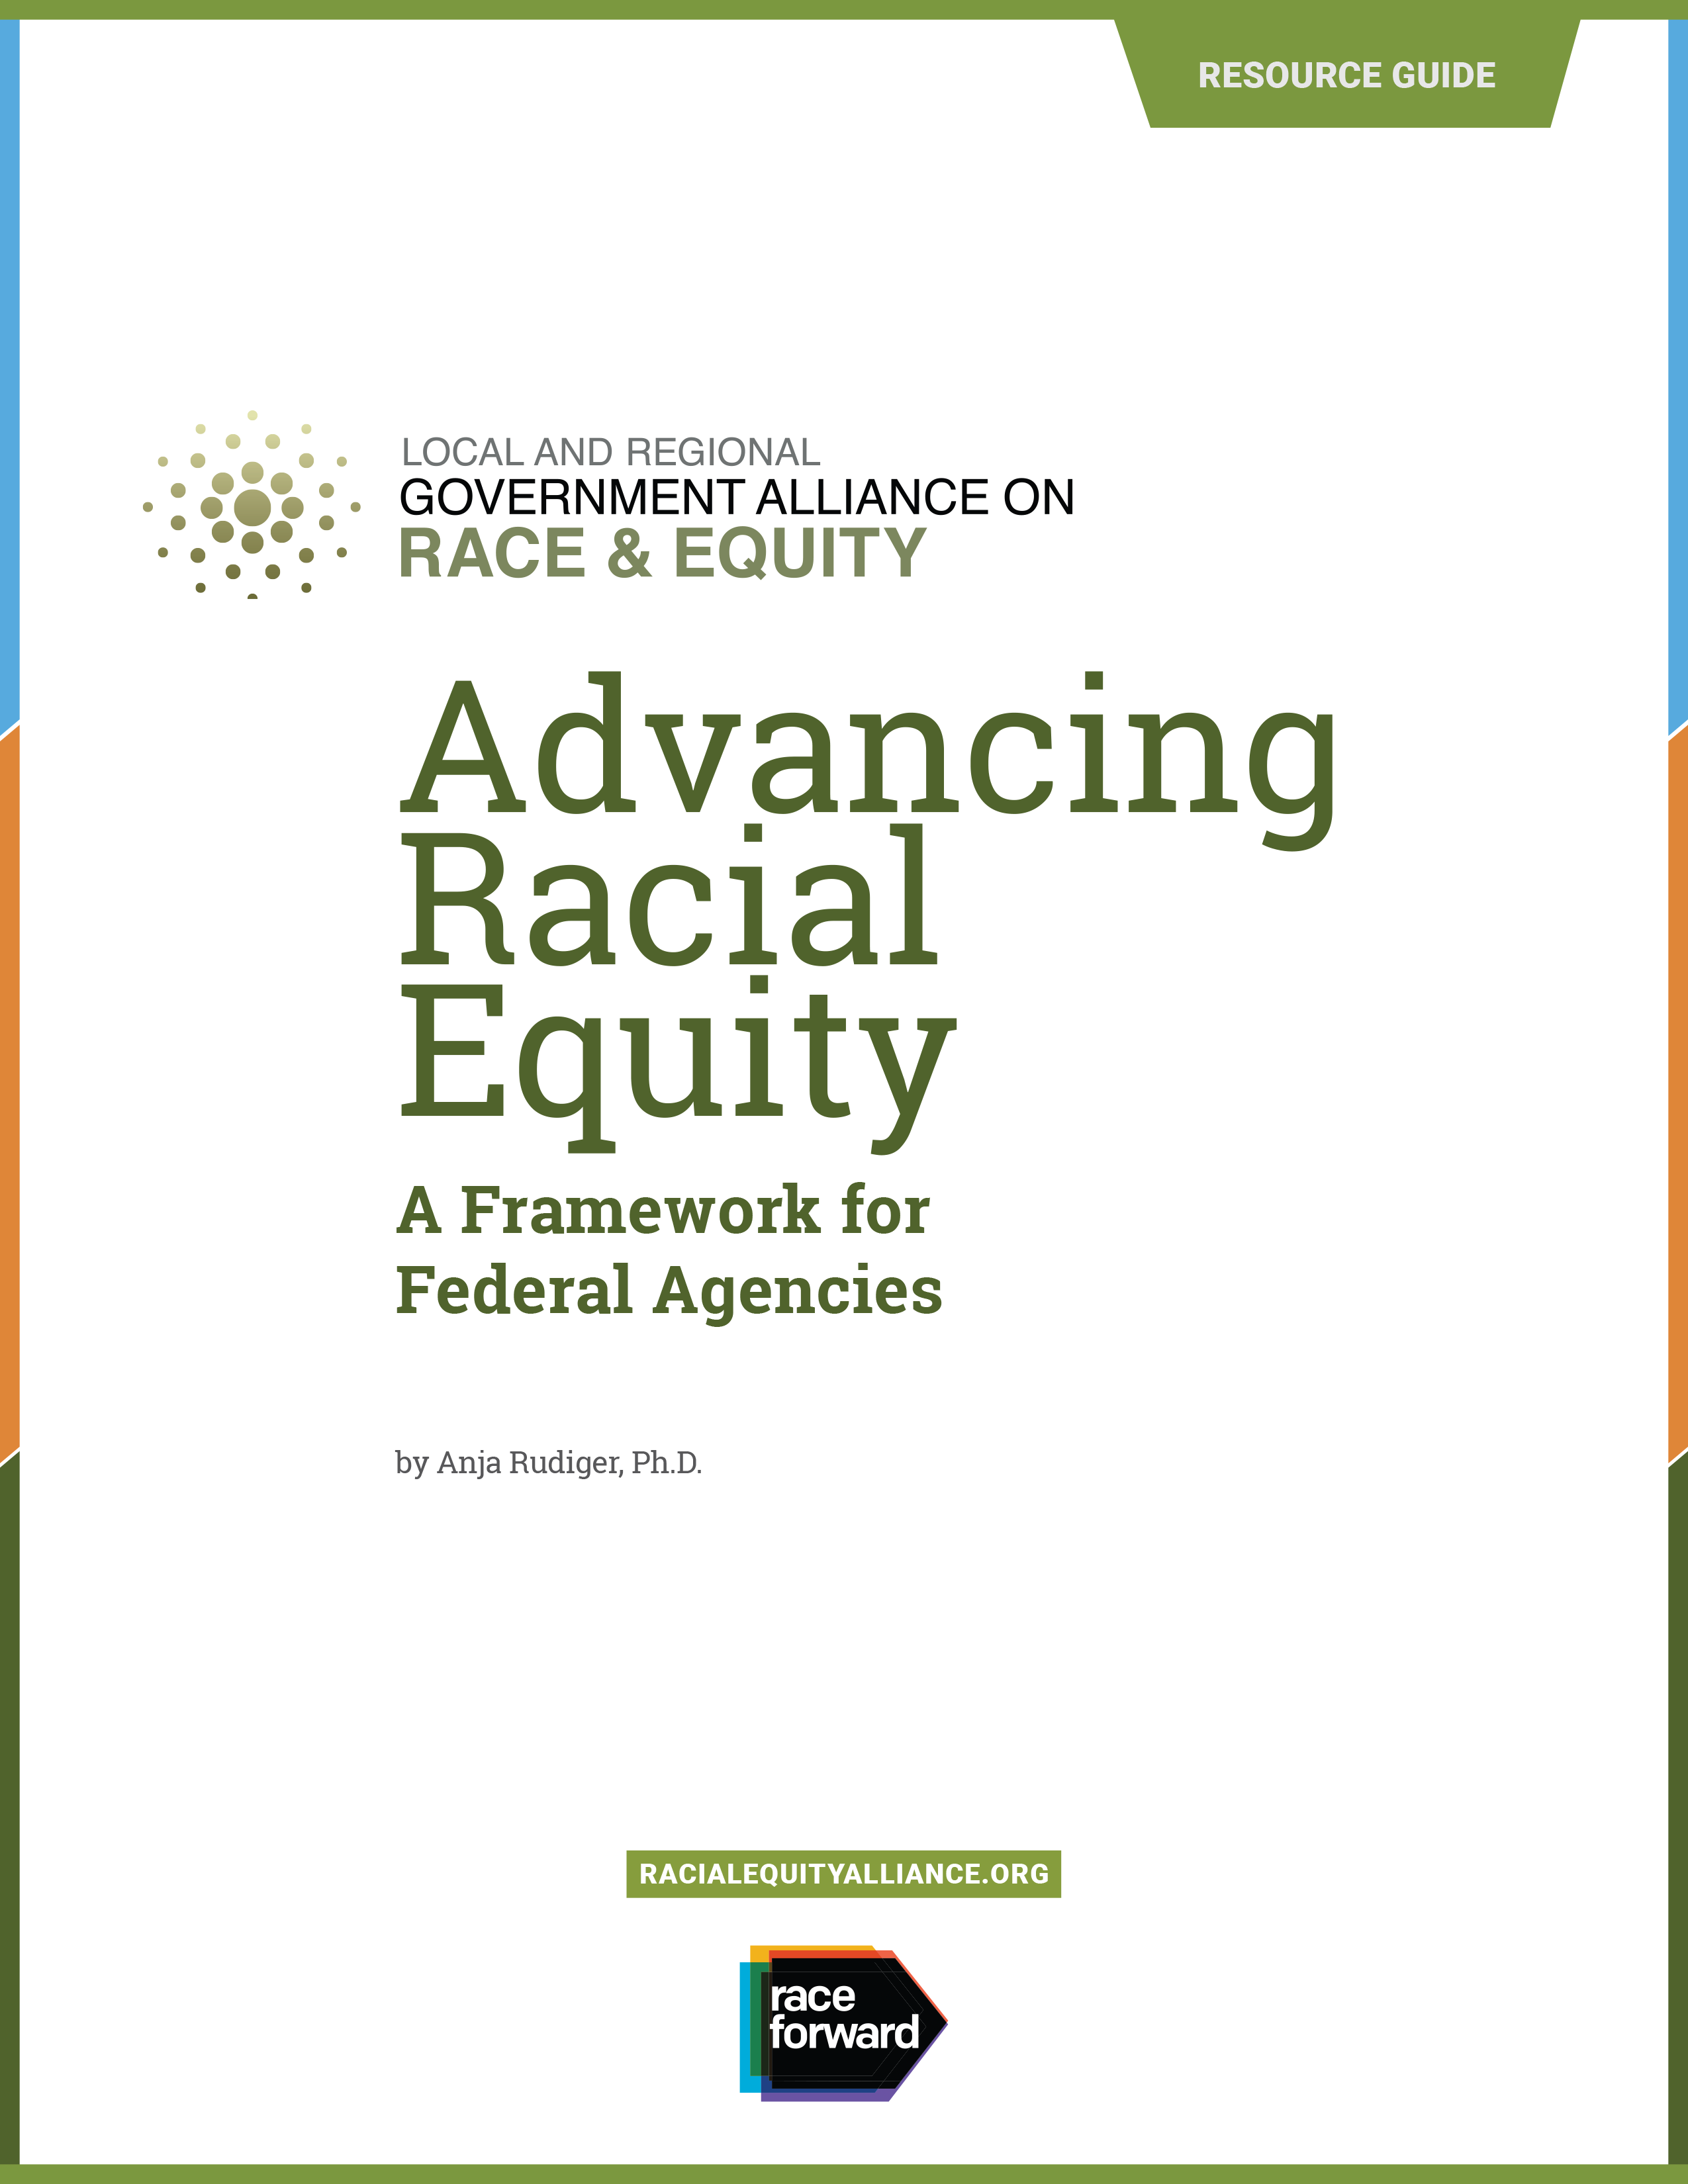 Report Cover _GARE-Advancing Racial Equity-A Framework for Federal Agencies